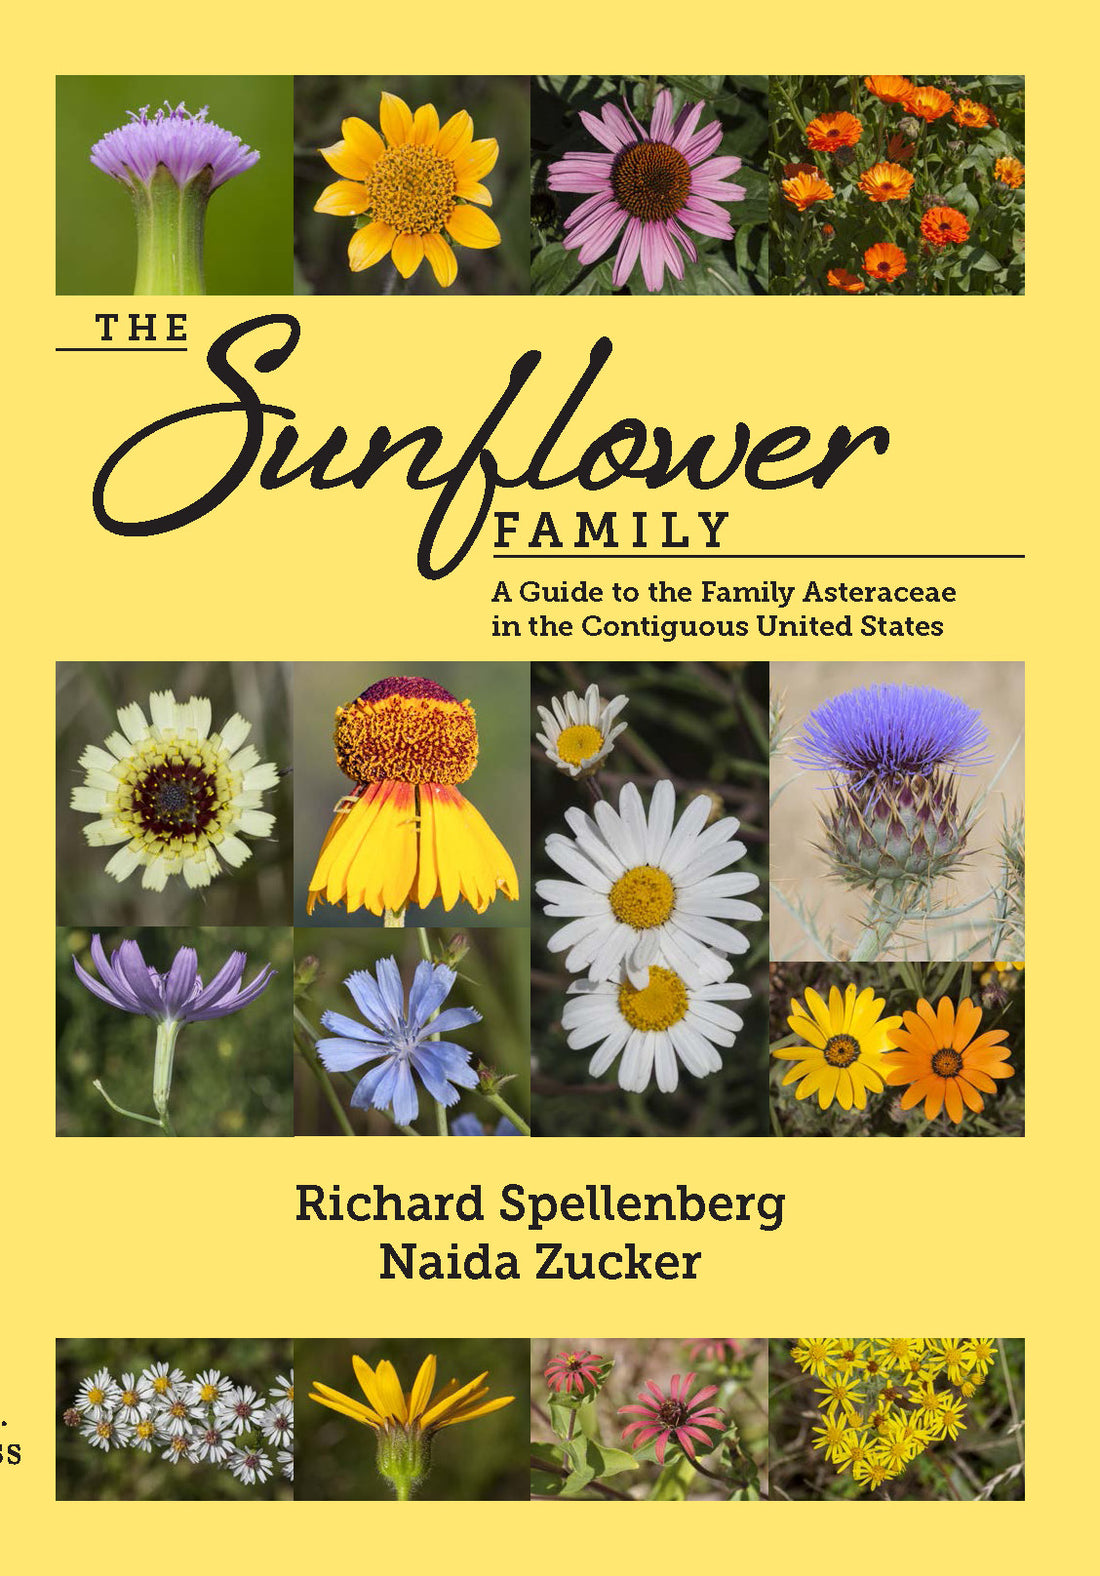 New Sunflower Family Book A Big Hit